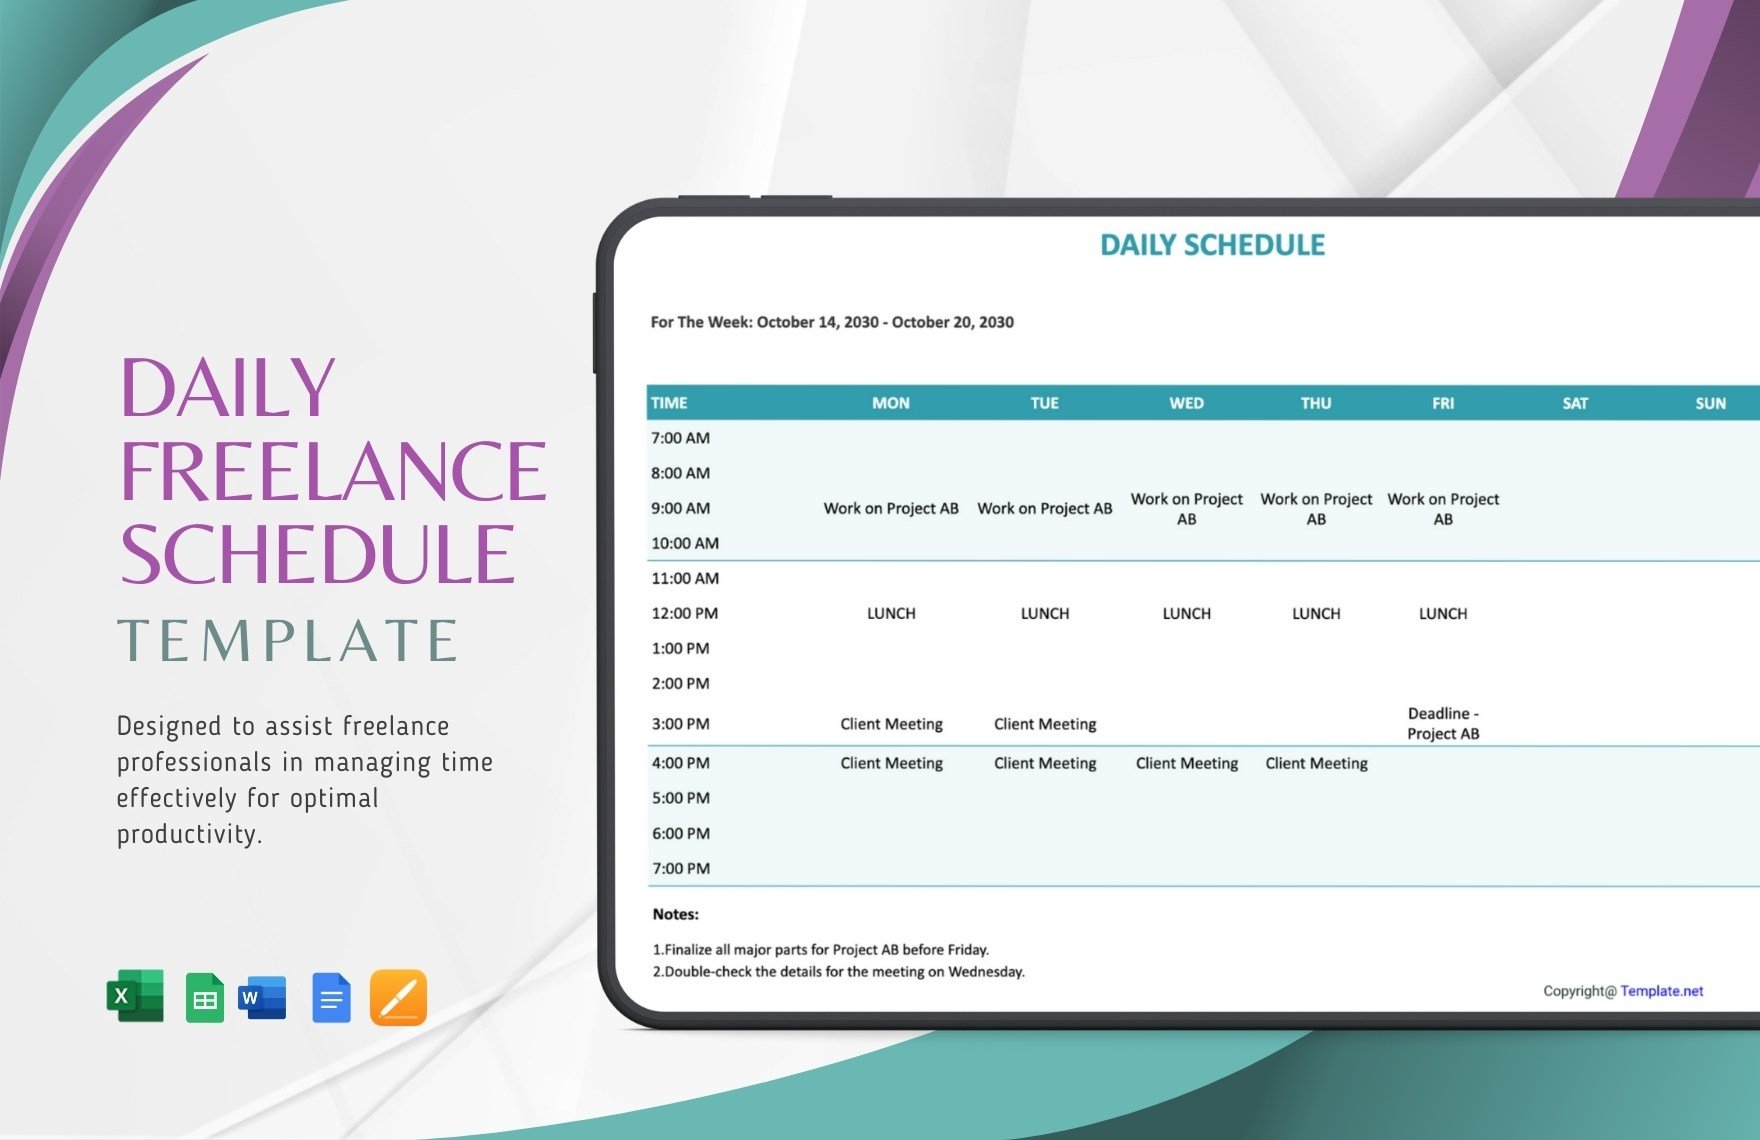 Daily Freelance Schedule Template